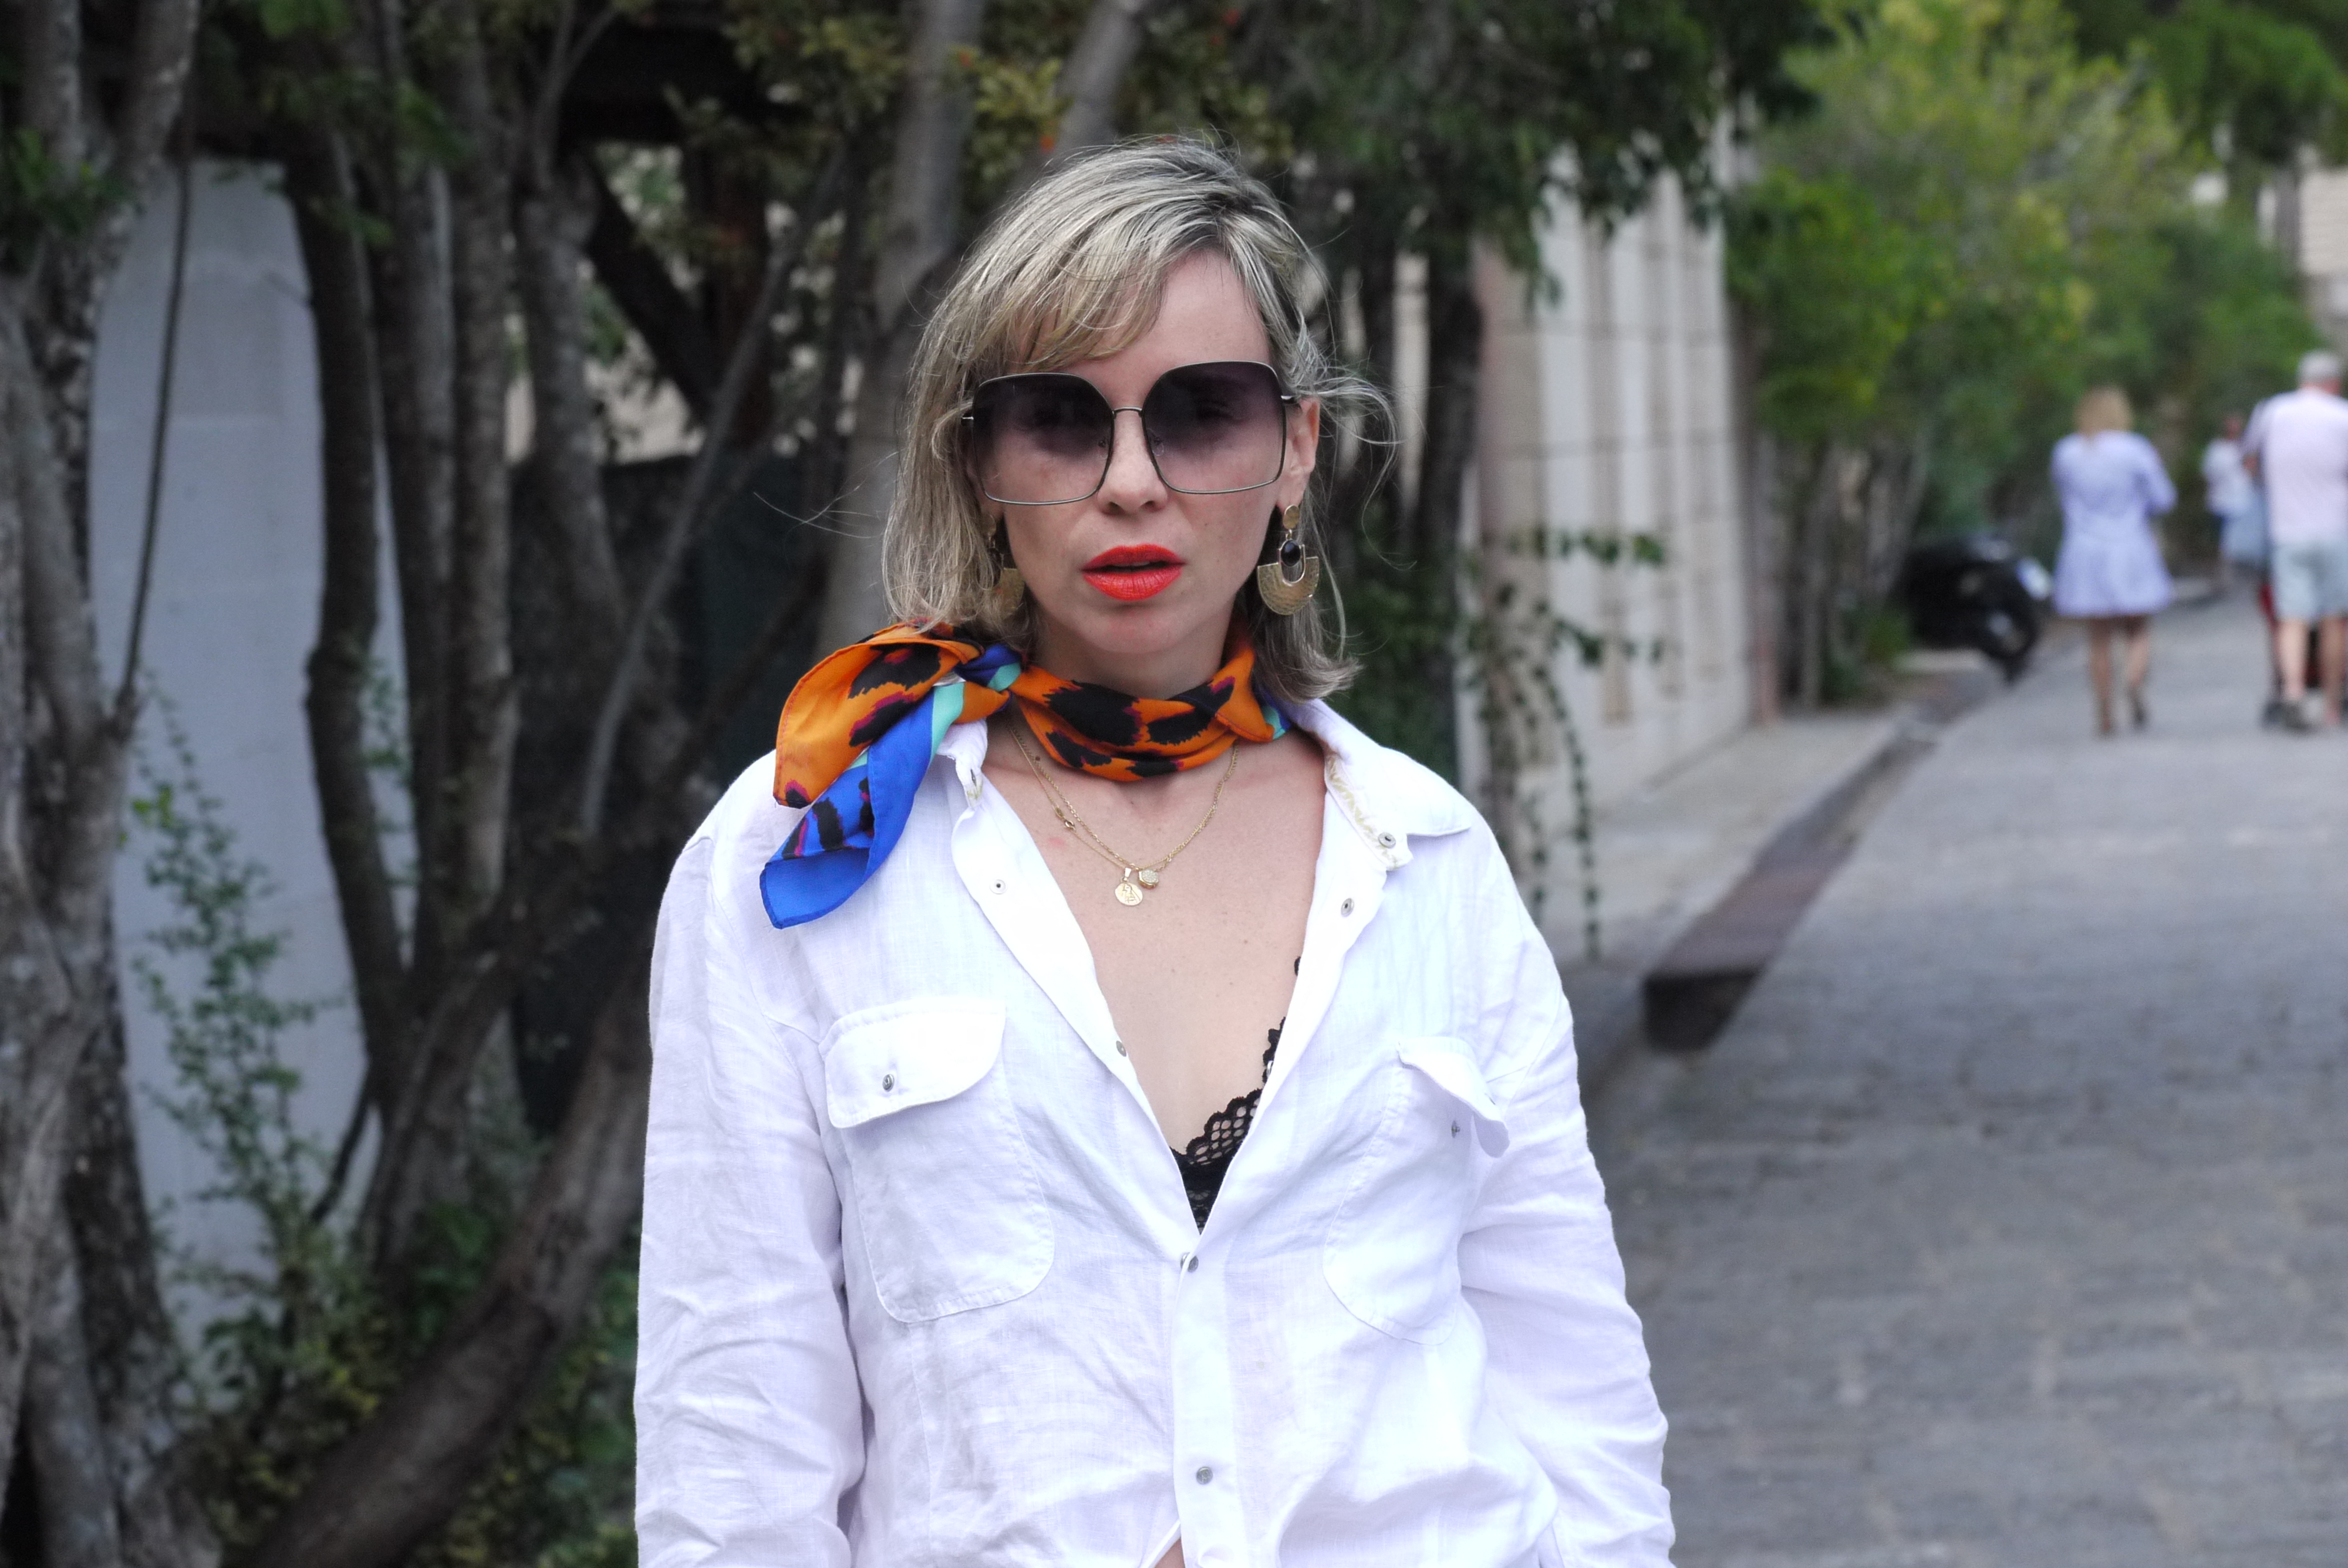 Alba Marina Otero fashion blogger from Mylovelypeople blog shares with you how to combine a white man shirt with shorts and spadrilles to walk around the city in your holidays